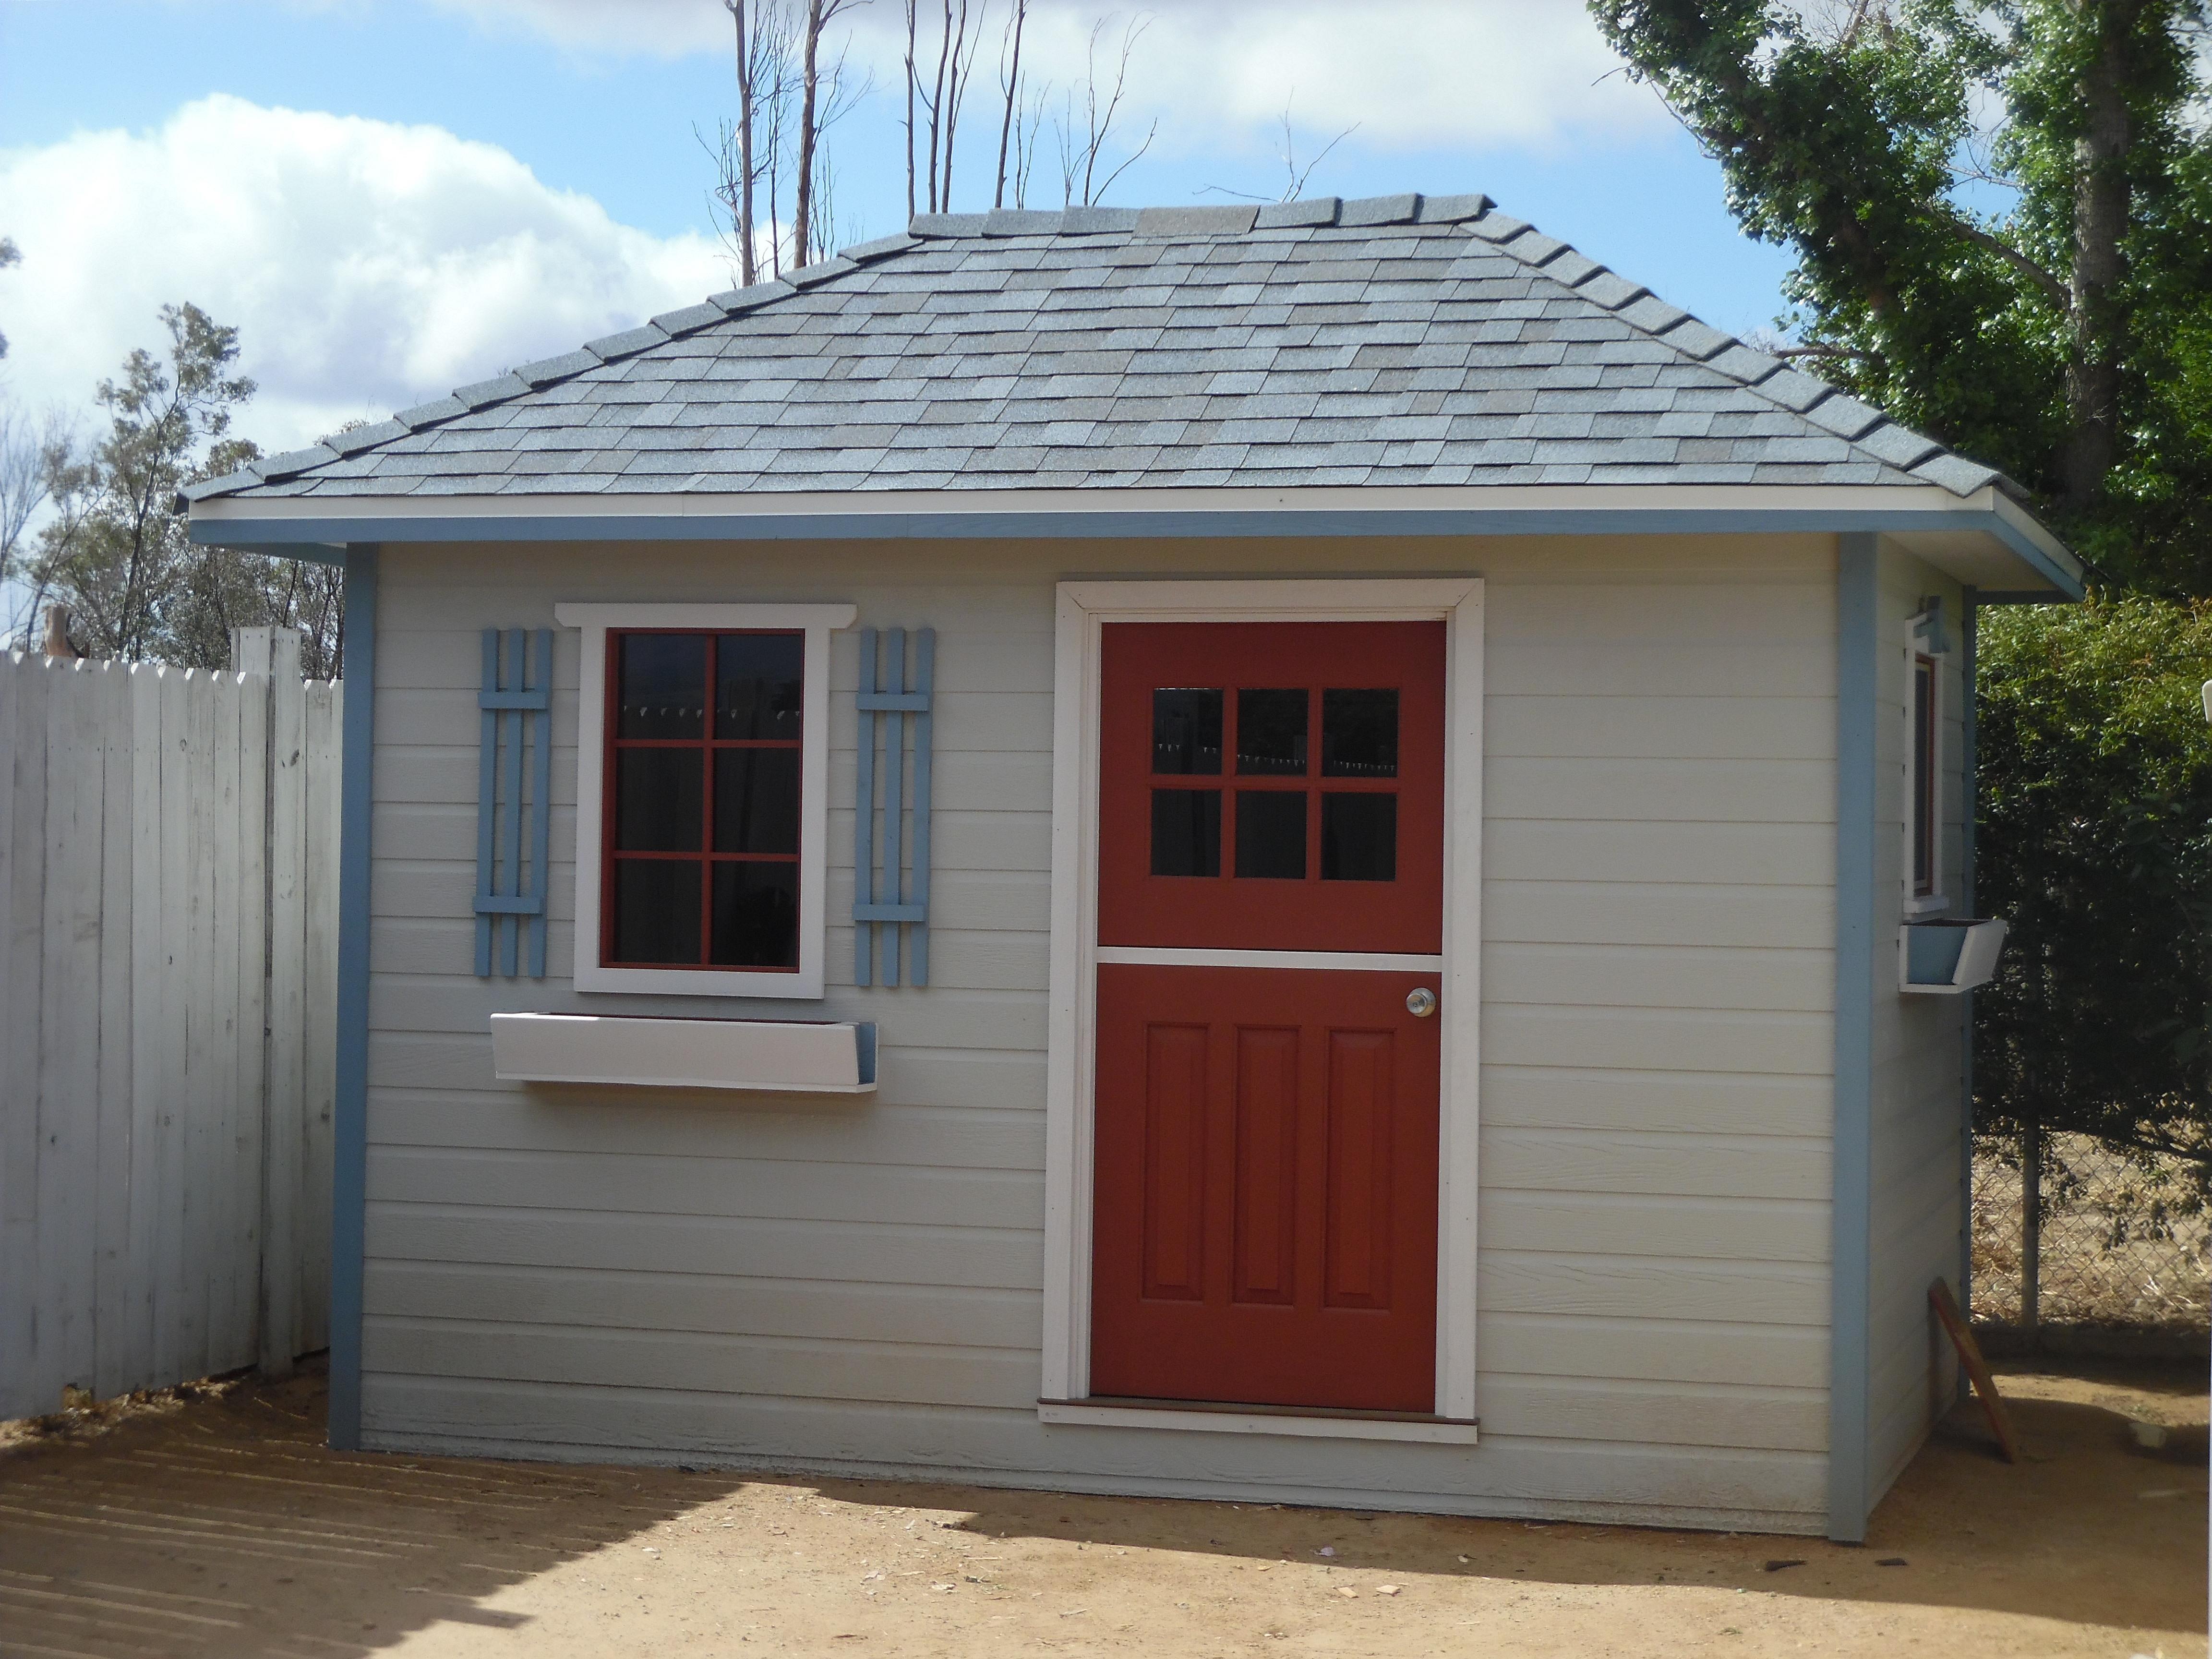 canexel sonoma shed 8x12 with single door in Beaumont, California. ID number 202472-2